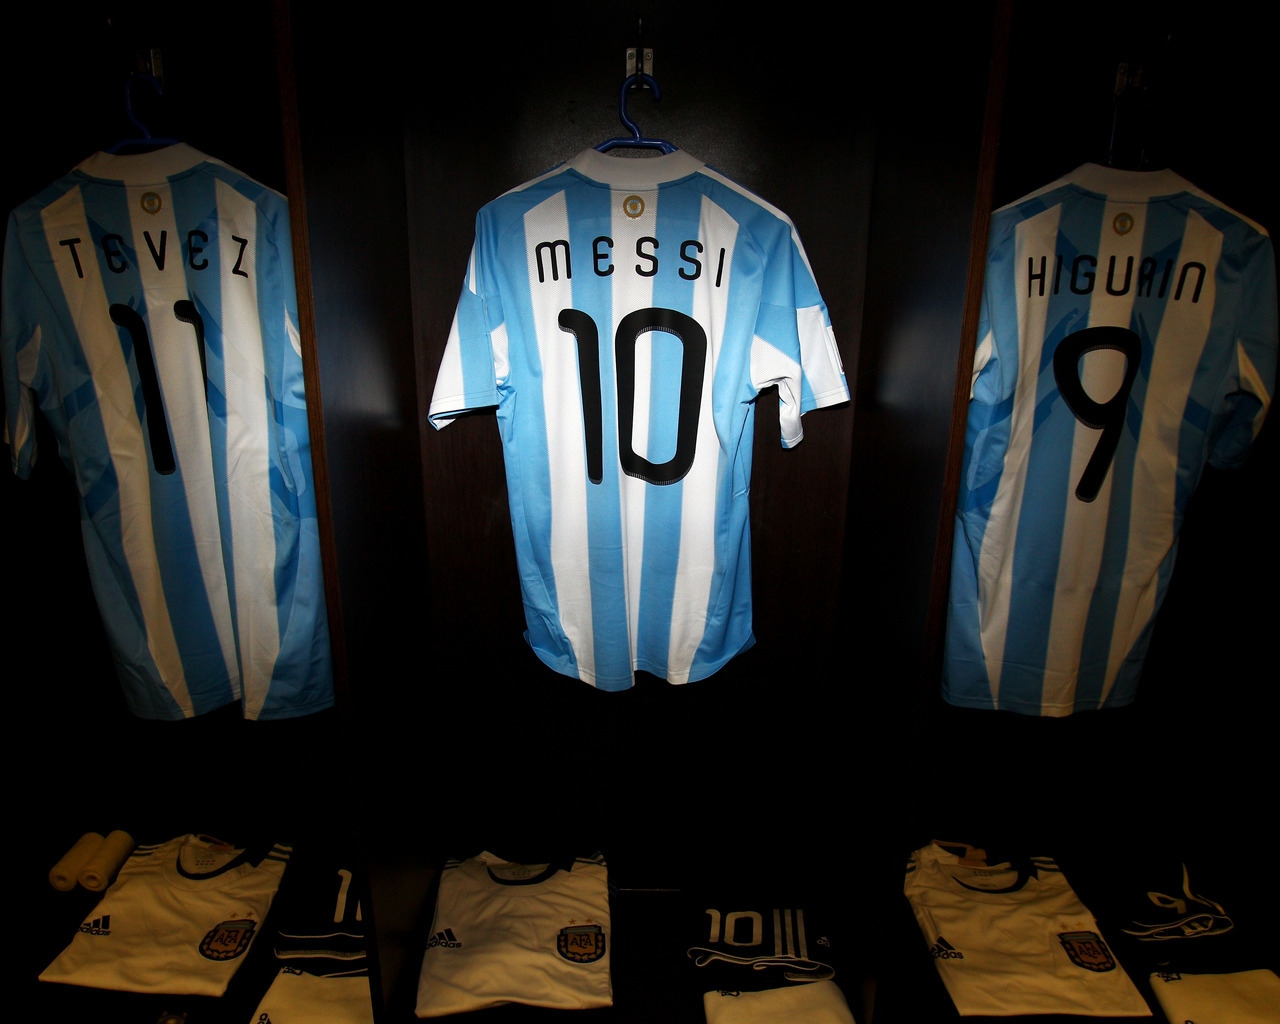 Tshirt of Messi, Tevez and Higuain for 1280 x 1024 resolution